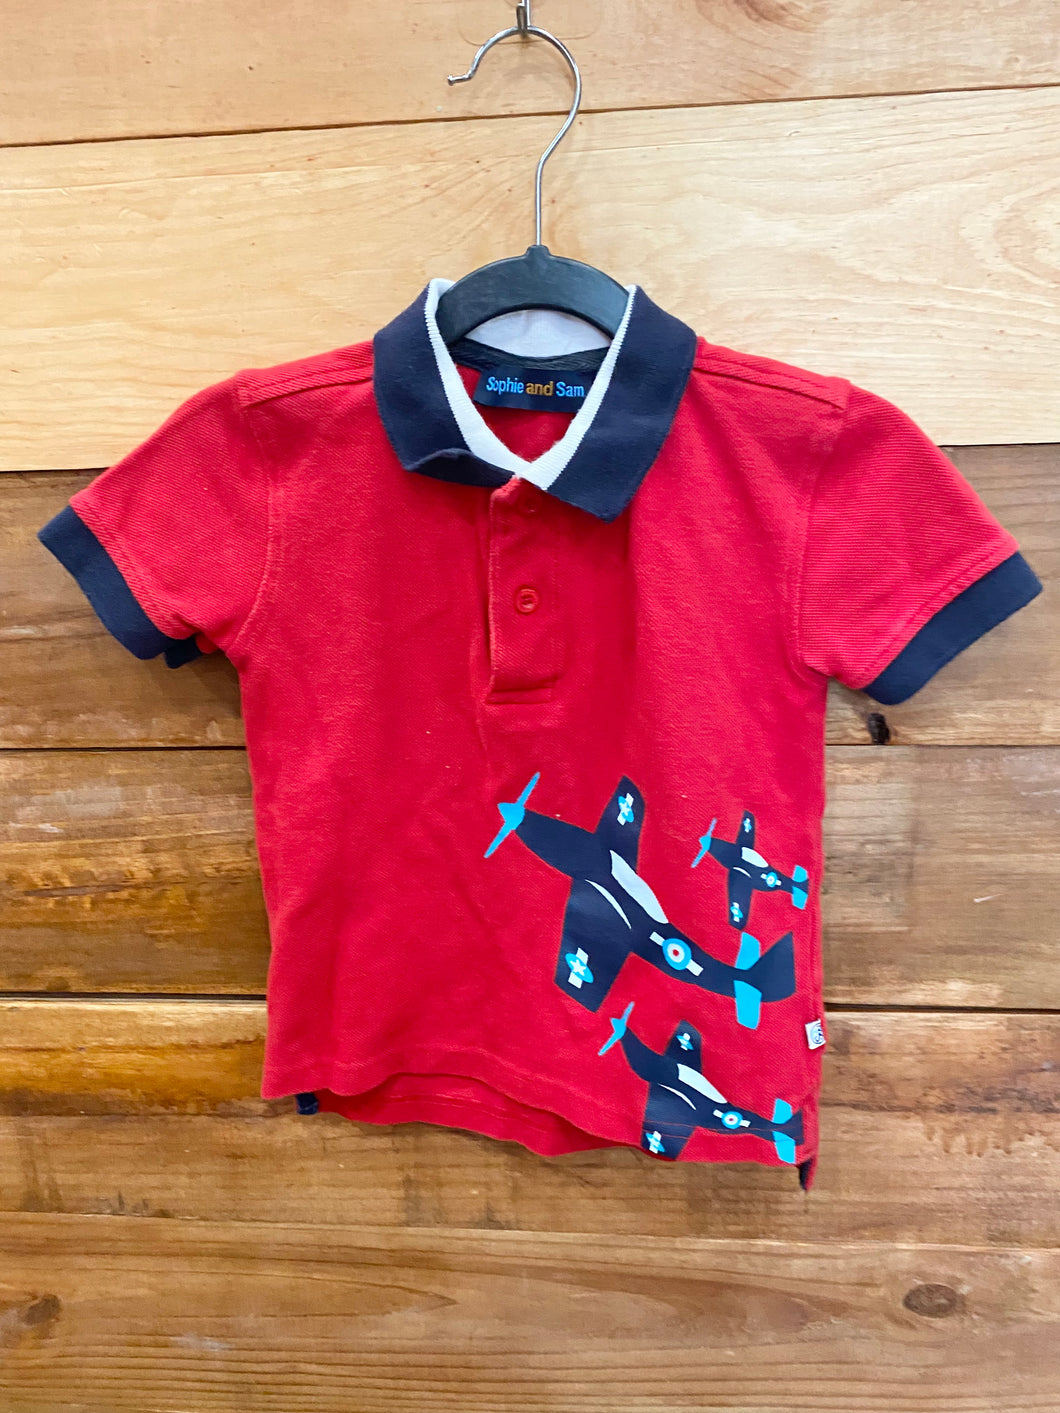 Sophie & Sam Red Airplane Shirt Size 3T